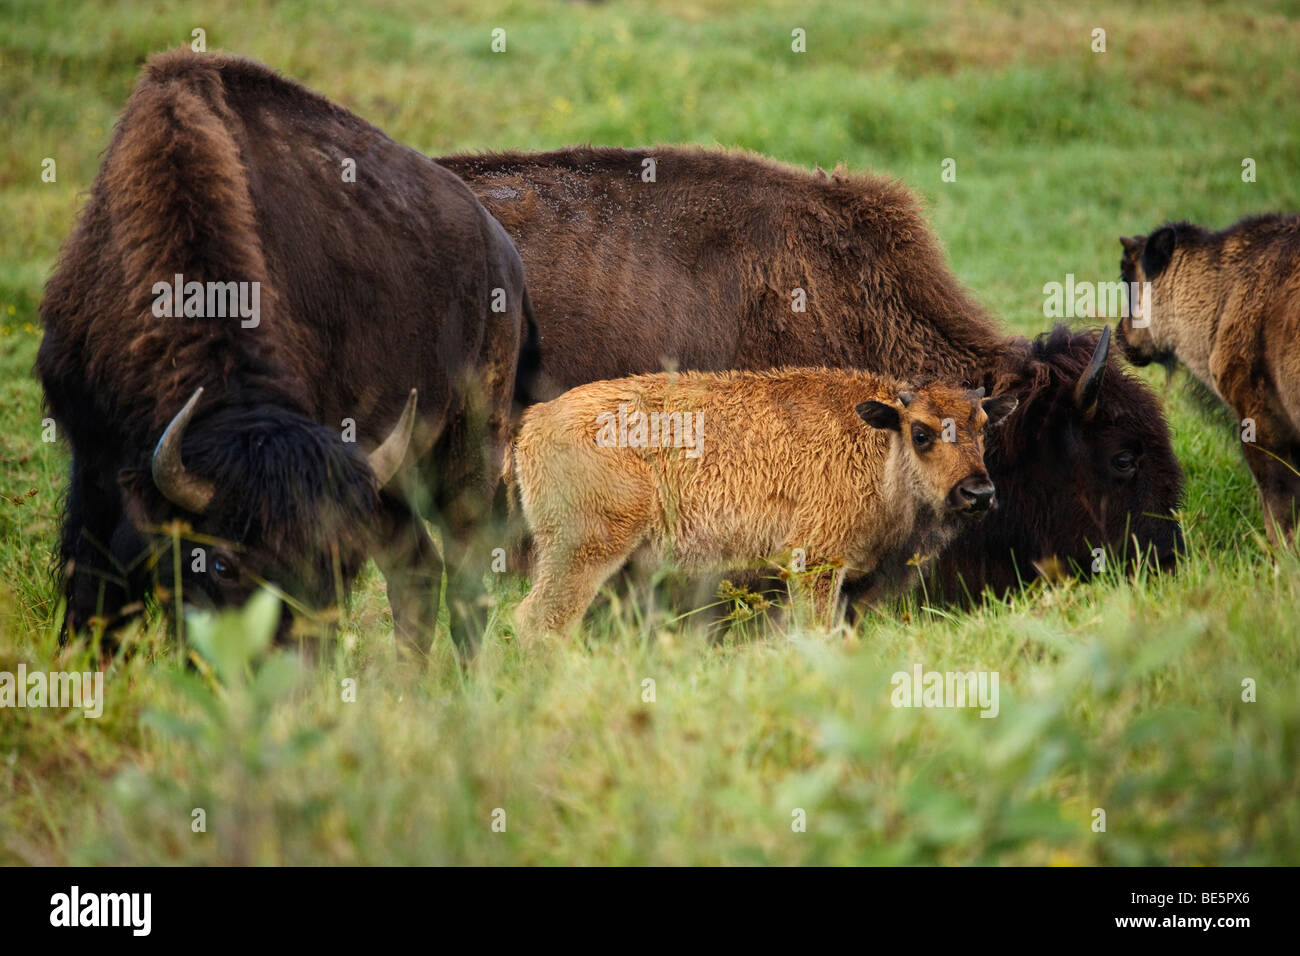 American bison (Bison bison) graze in pasture on a ranch in South Kona, Hawaii Stock Photo